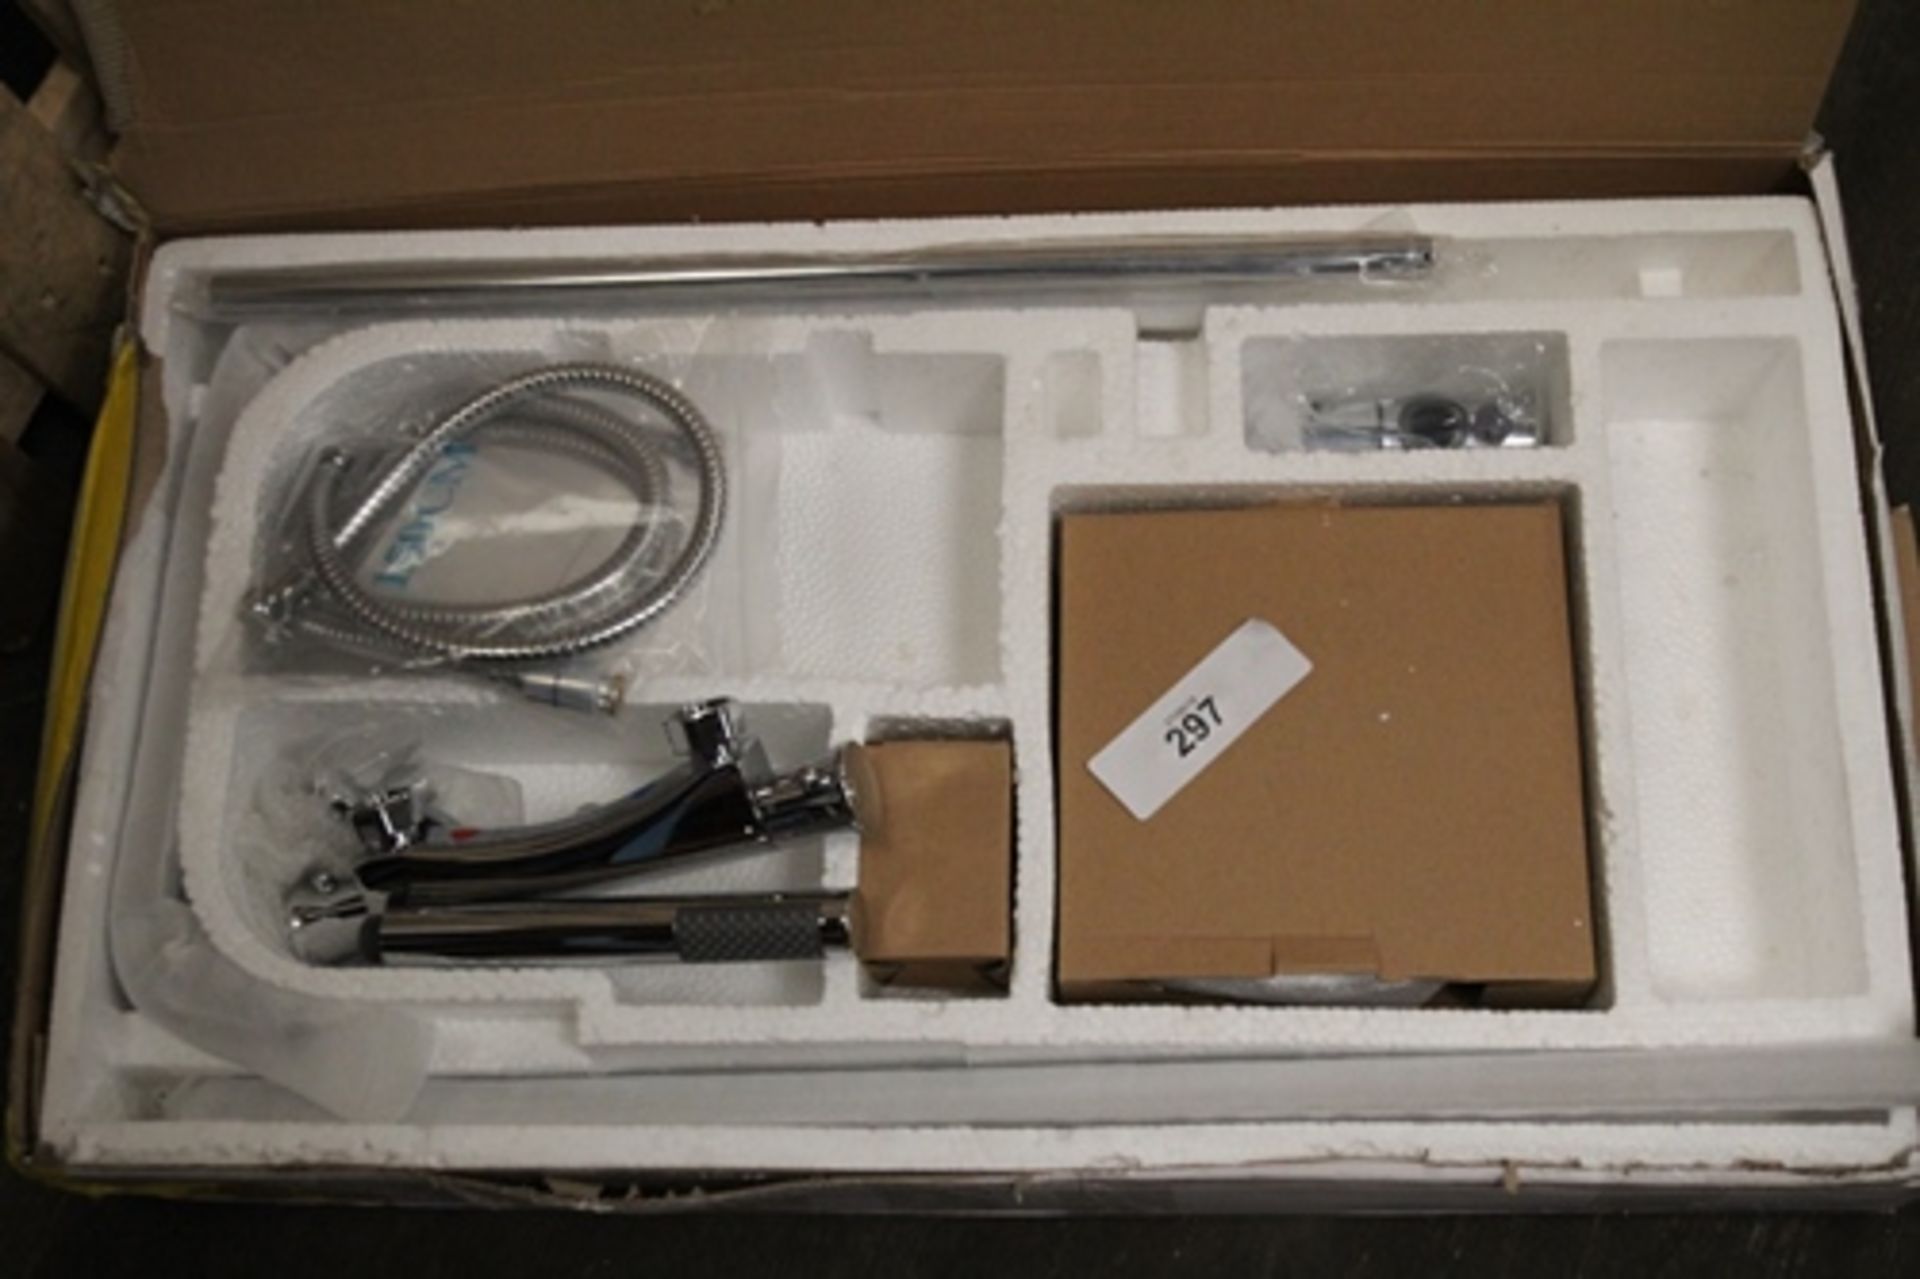 An unbranded up and over twin shower system chrome, unknown model - New in box (B28)